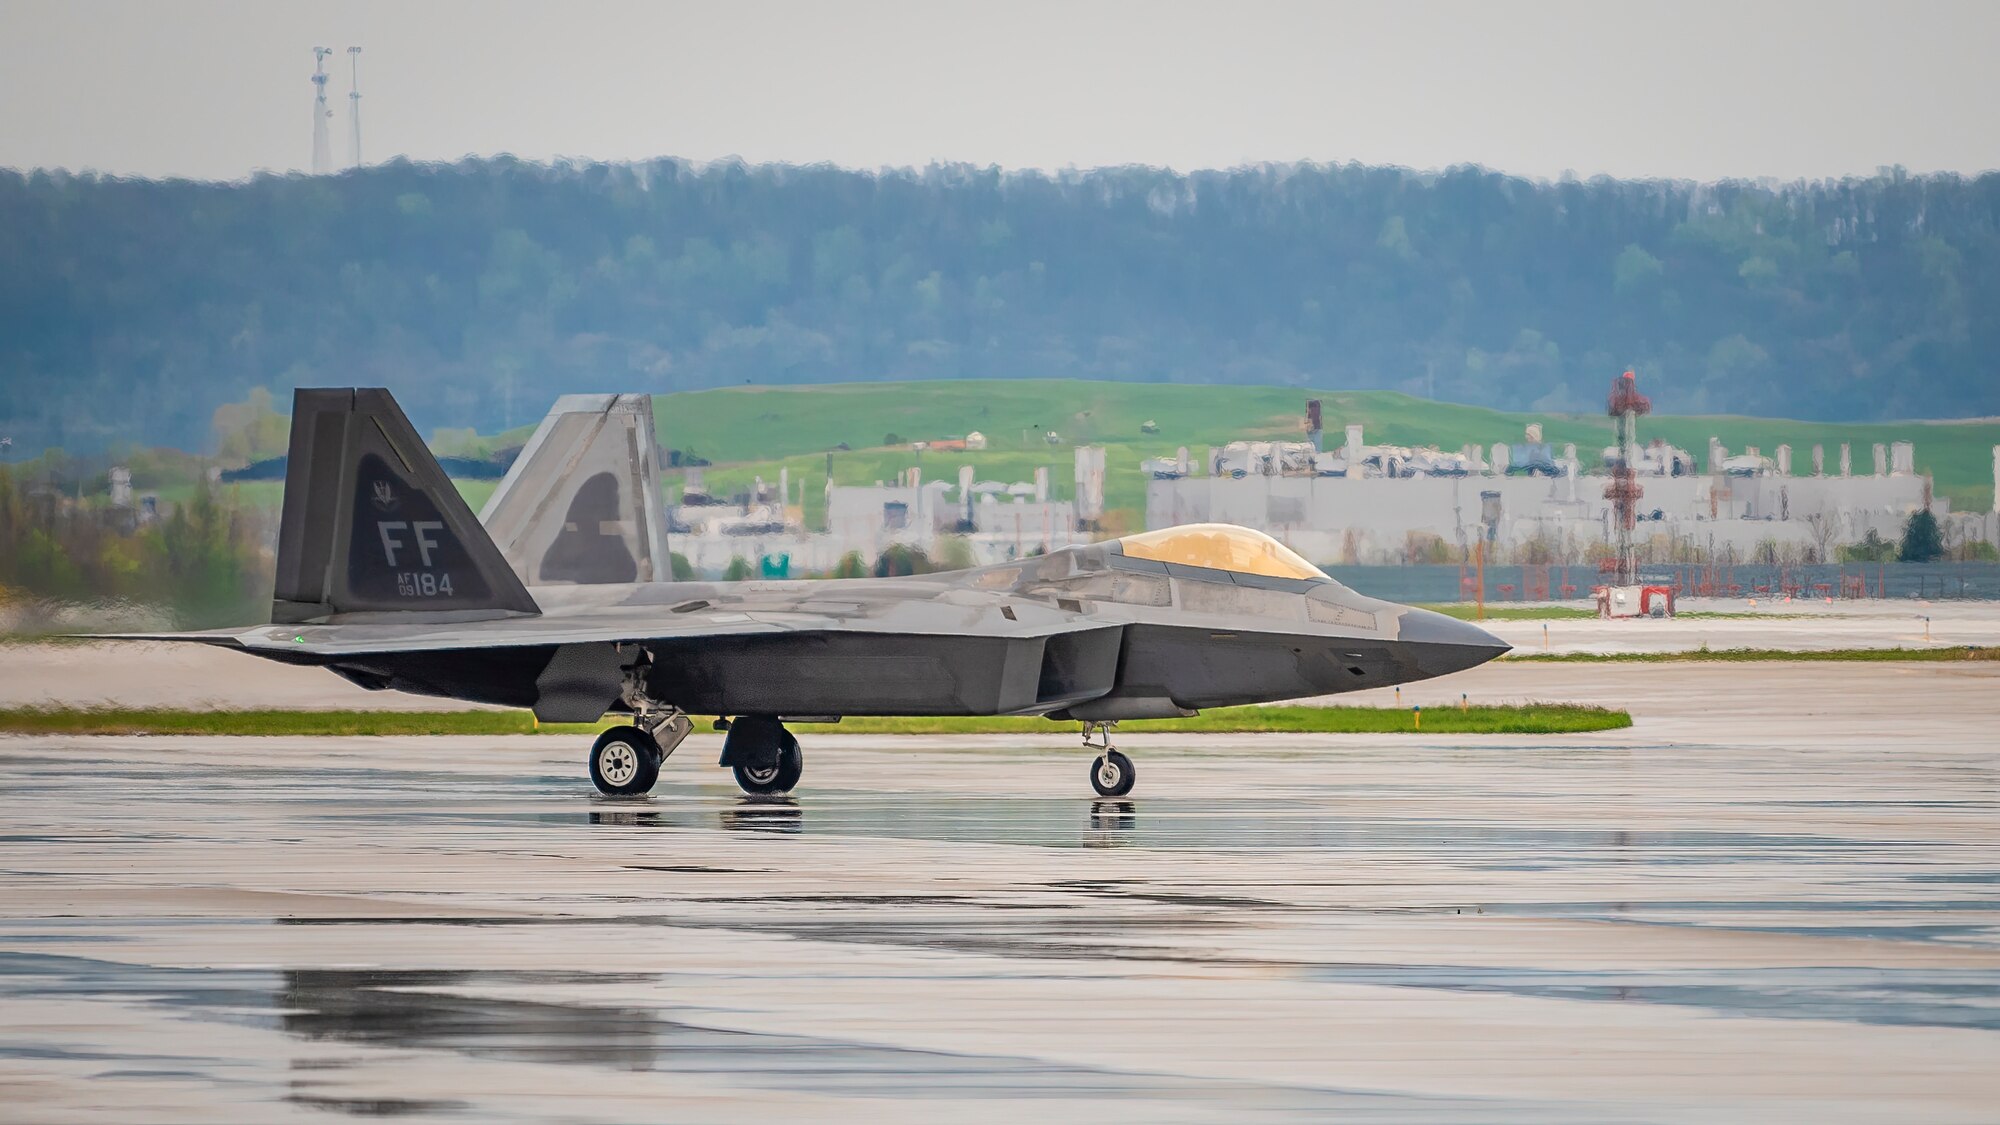 A U.S. Air Force pilot guides his F-22 Raptor to a parking spot on the flight line of the Kentucky Air National Guard Base in Louisville, Ky., April 21, 2022. The two-ship Raptor Demonstration Team will be among the highlights of this year’s Thunder Over Louisville air show, to be held on the banks of the Ohio River in downtown Louisville on April 23. The event, which celebrates the 75th anniversary of the United States Air Force, is slated to feature more than 30 military and civilian aircraft, including the B-2 Spirit, C-17 Globemaster III, CV-22 Osprey, CH-53 Sea Stallion, F-16 Viper and UH-60 Blackhawk, in addition to eight historic warbirds like the B-24 Liberator, B-29 Superfortress and P-51 Mustang. (U.S. Air National Guard photo by Dale Greer)